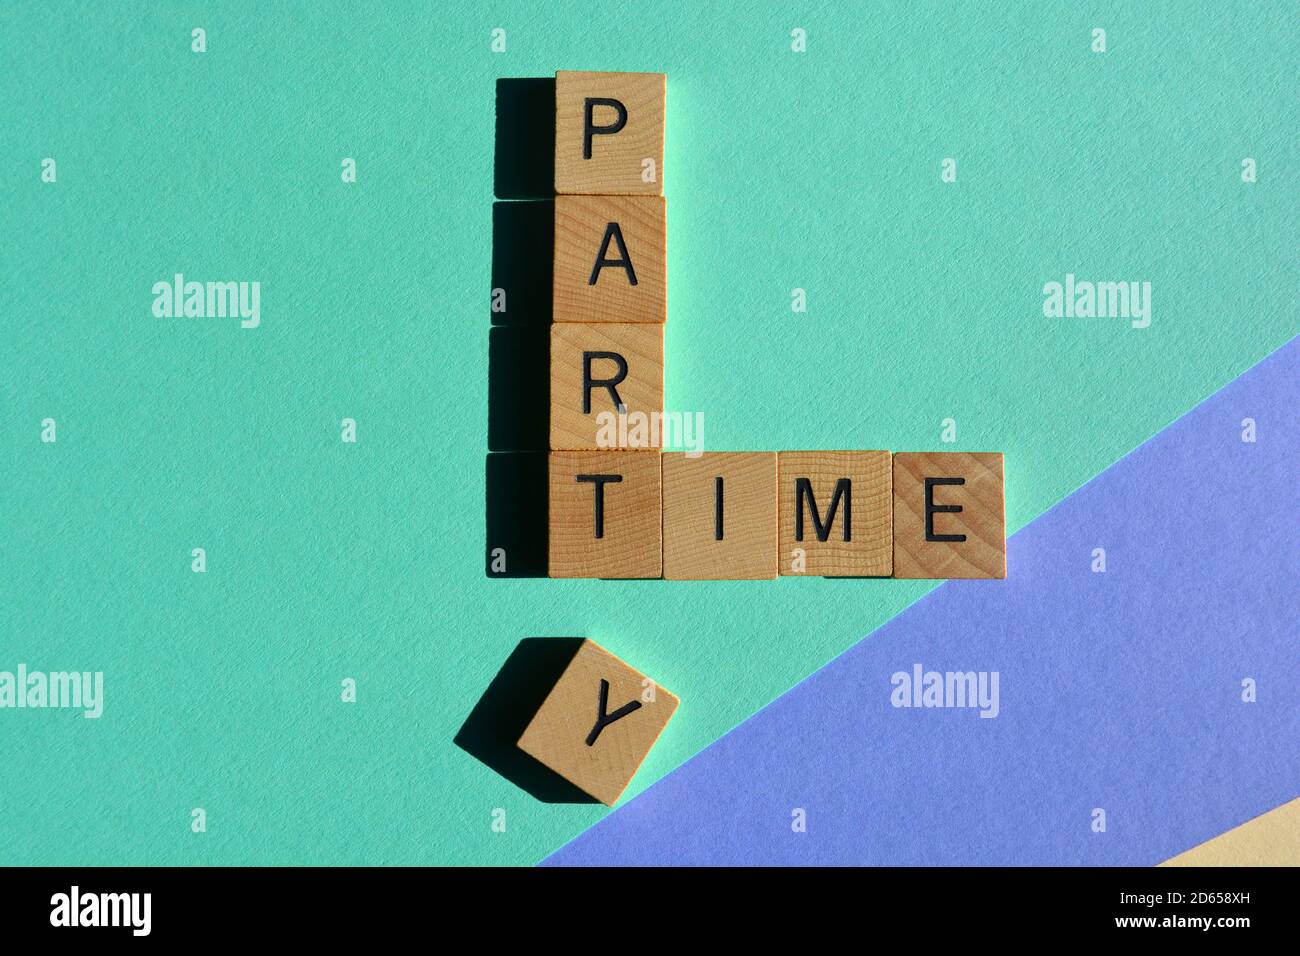 Party Time With The Letter Y Separated From The Word Part To Read Part Time A Play On Words Stock Photo Alamy